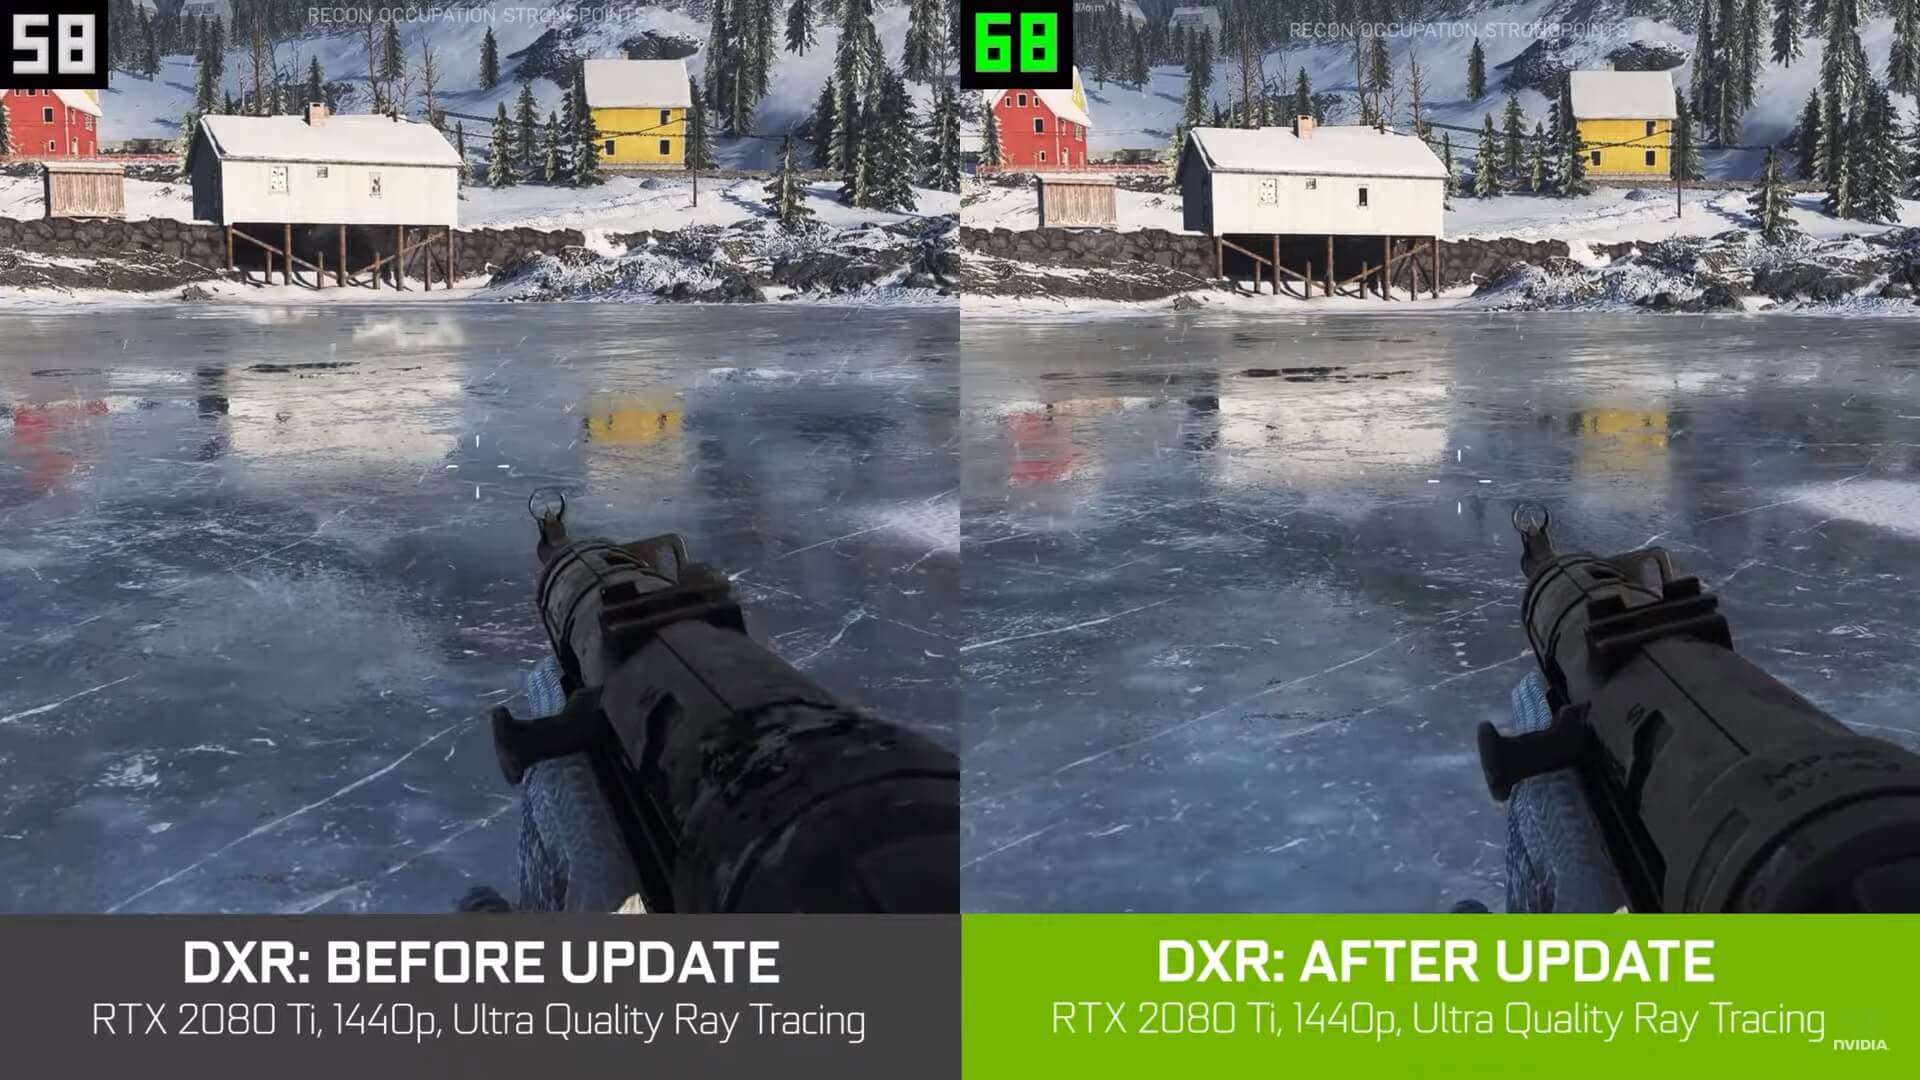 Battlefield V DXR Real-Time Ray Tracing Performance Tested